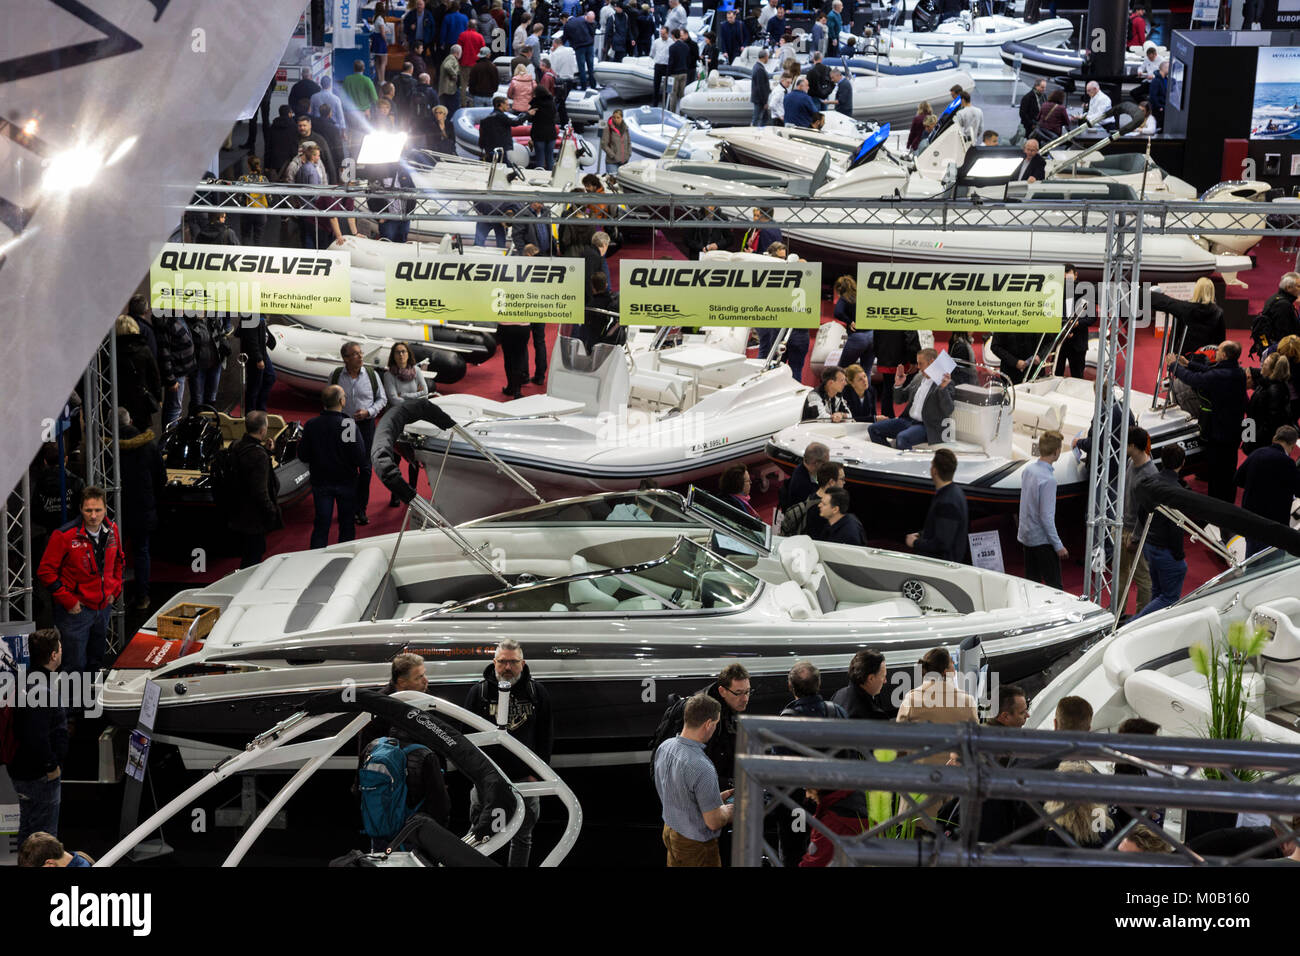 Düsseldorf, Germany. Yachts on display. boot Düsseldorf 2018, the world's greatest boat & watersports show opens at Düsseldorf Exhibition Center. With 1,923 exhibitors from 68 countries, including 1,085 international manufacturers, boot Düsseldorf runs until 28 January 2018. Stock Photo